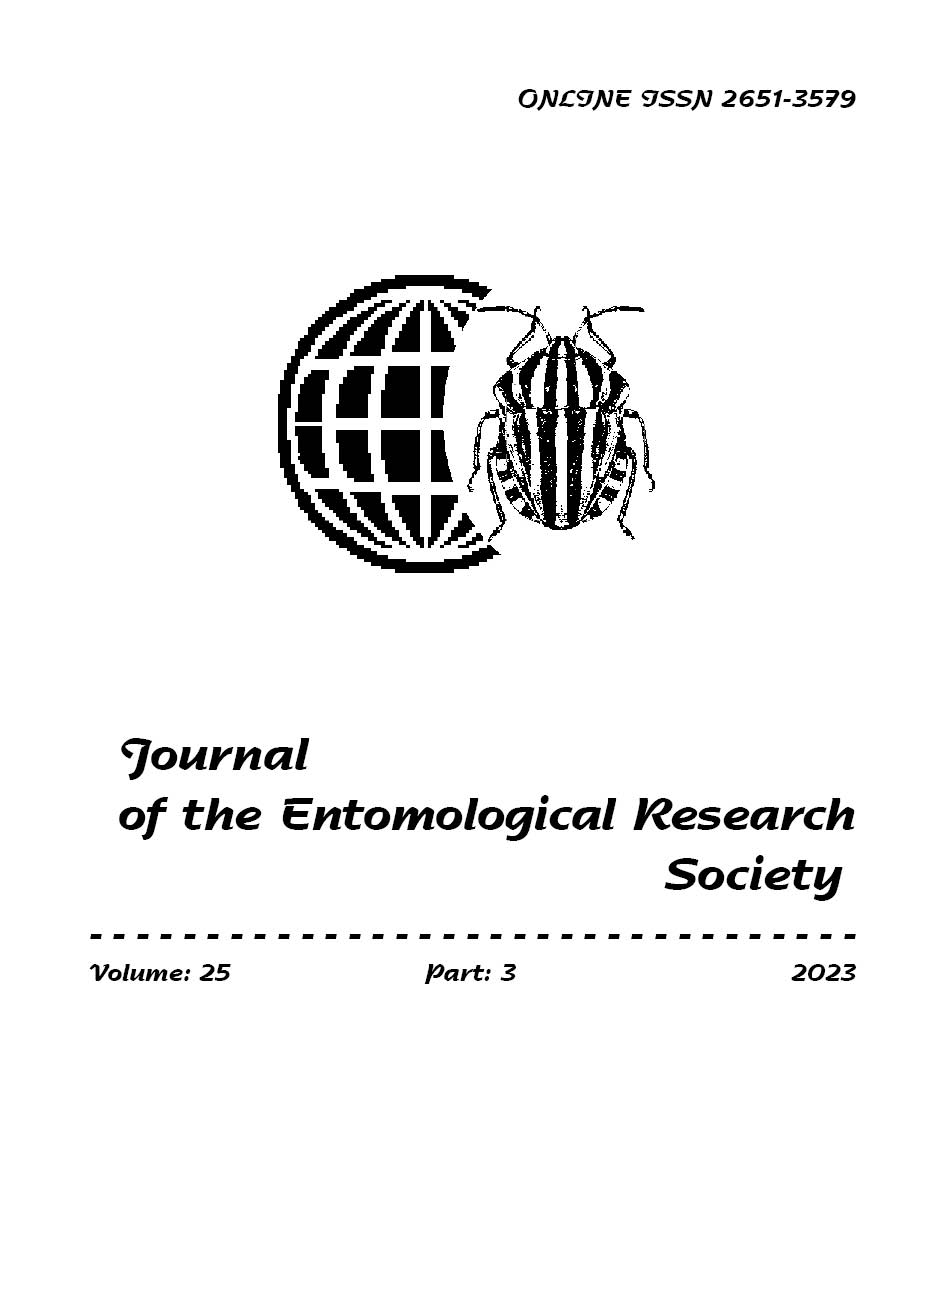 					View Vol. 25 No. 3 (2023): Journal of the Entomological Research Society
				